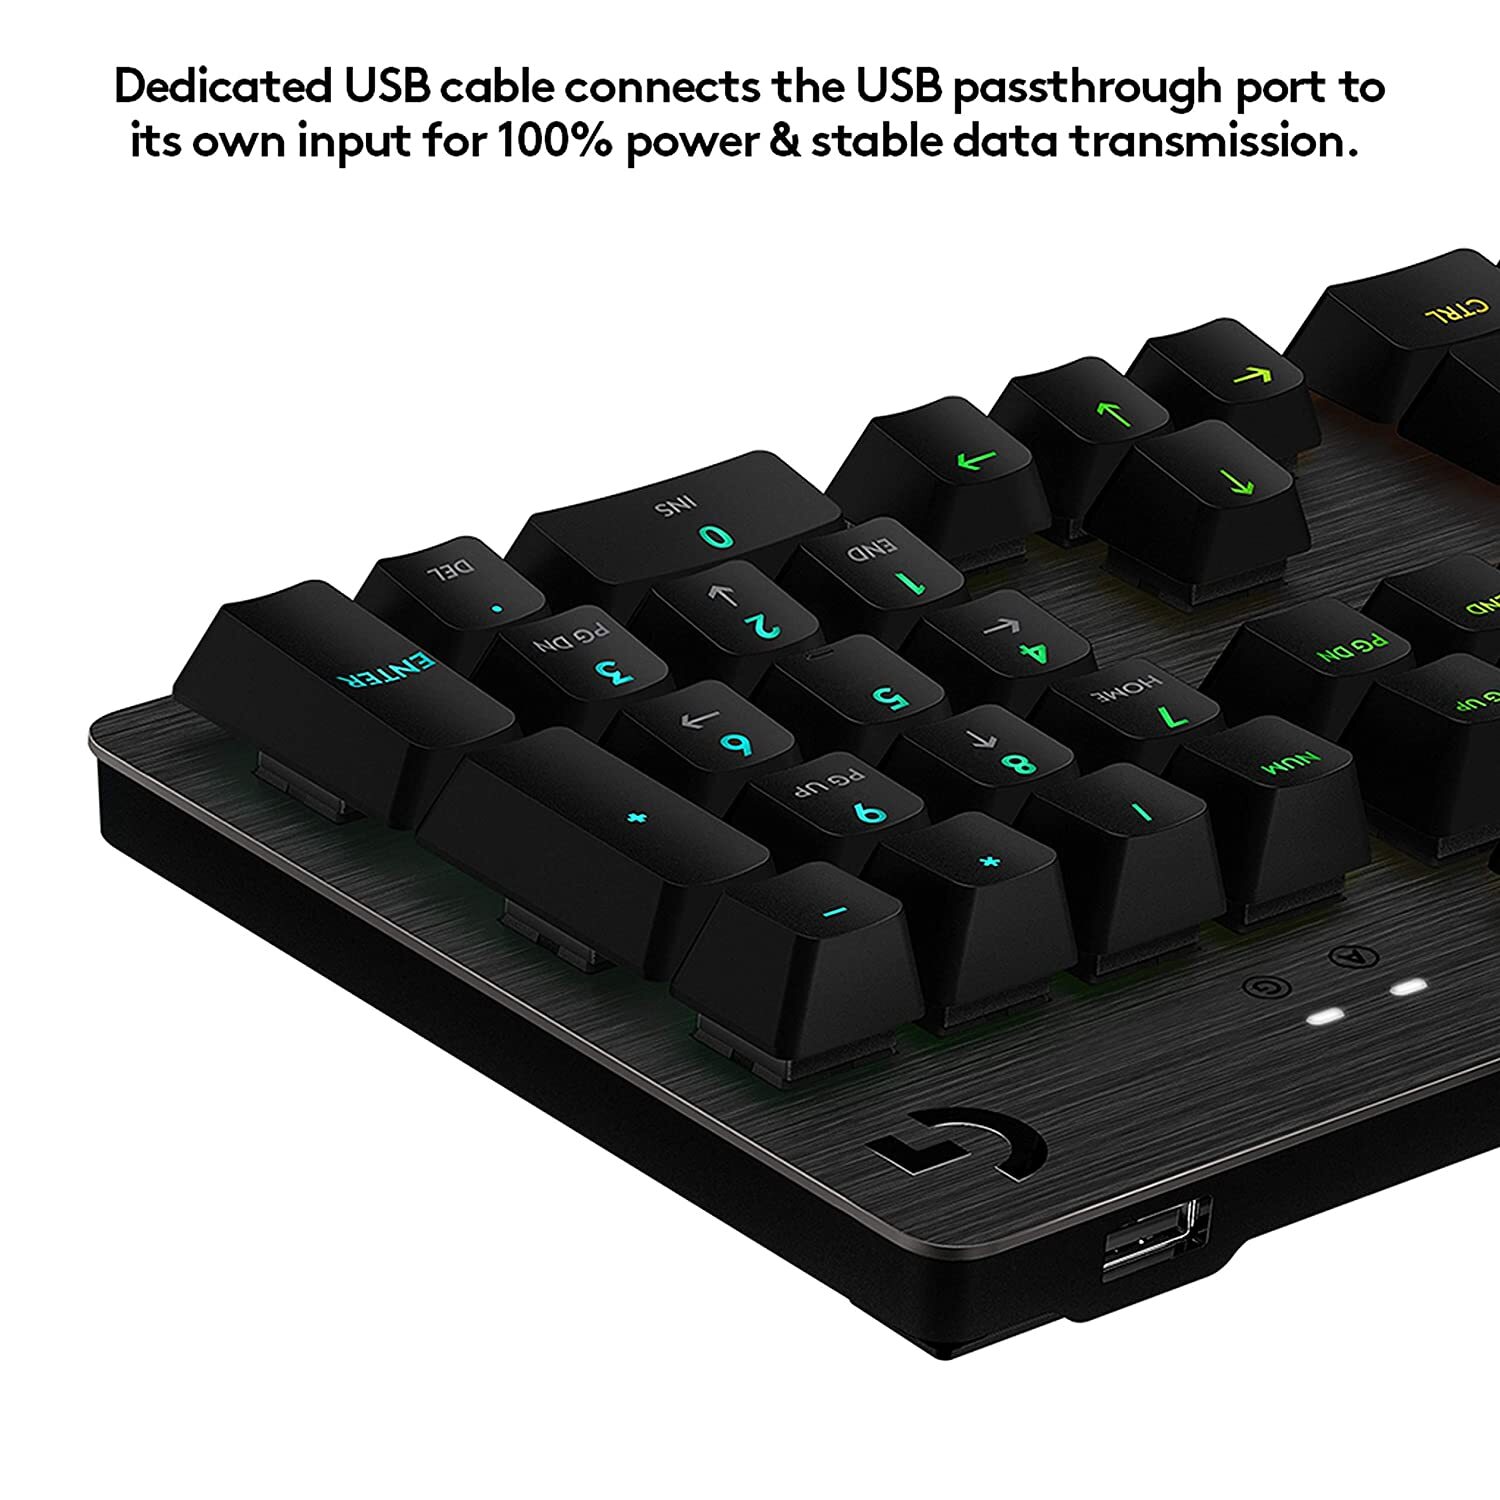 Logitech G 512 RGB Backlit Mechanical Gaming Keyboard with GX Blue Clicky Key Switches (Carbon)